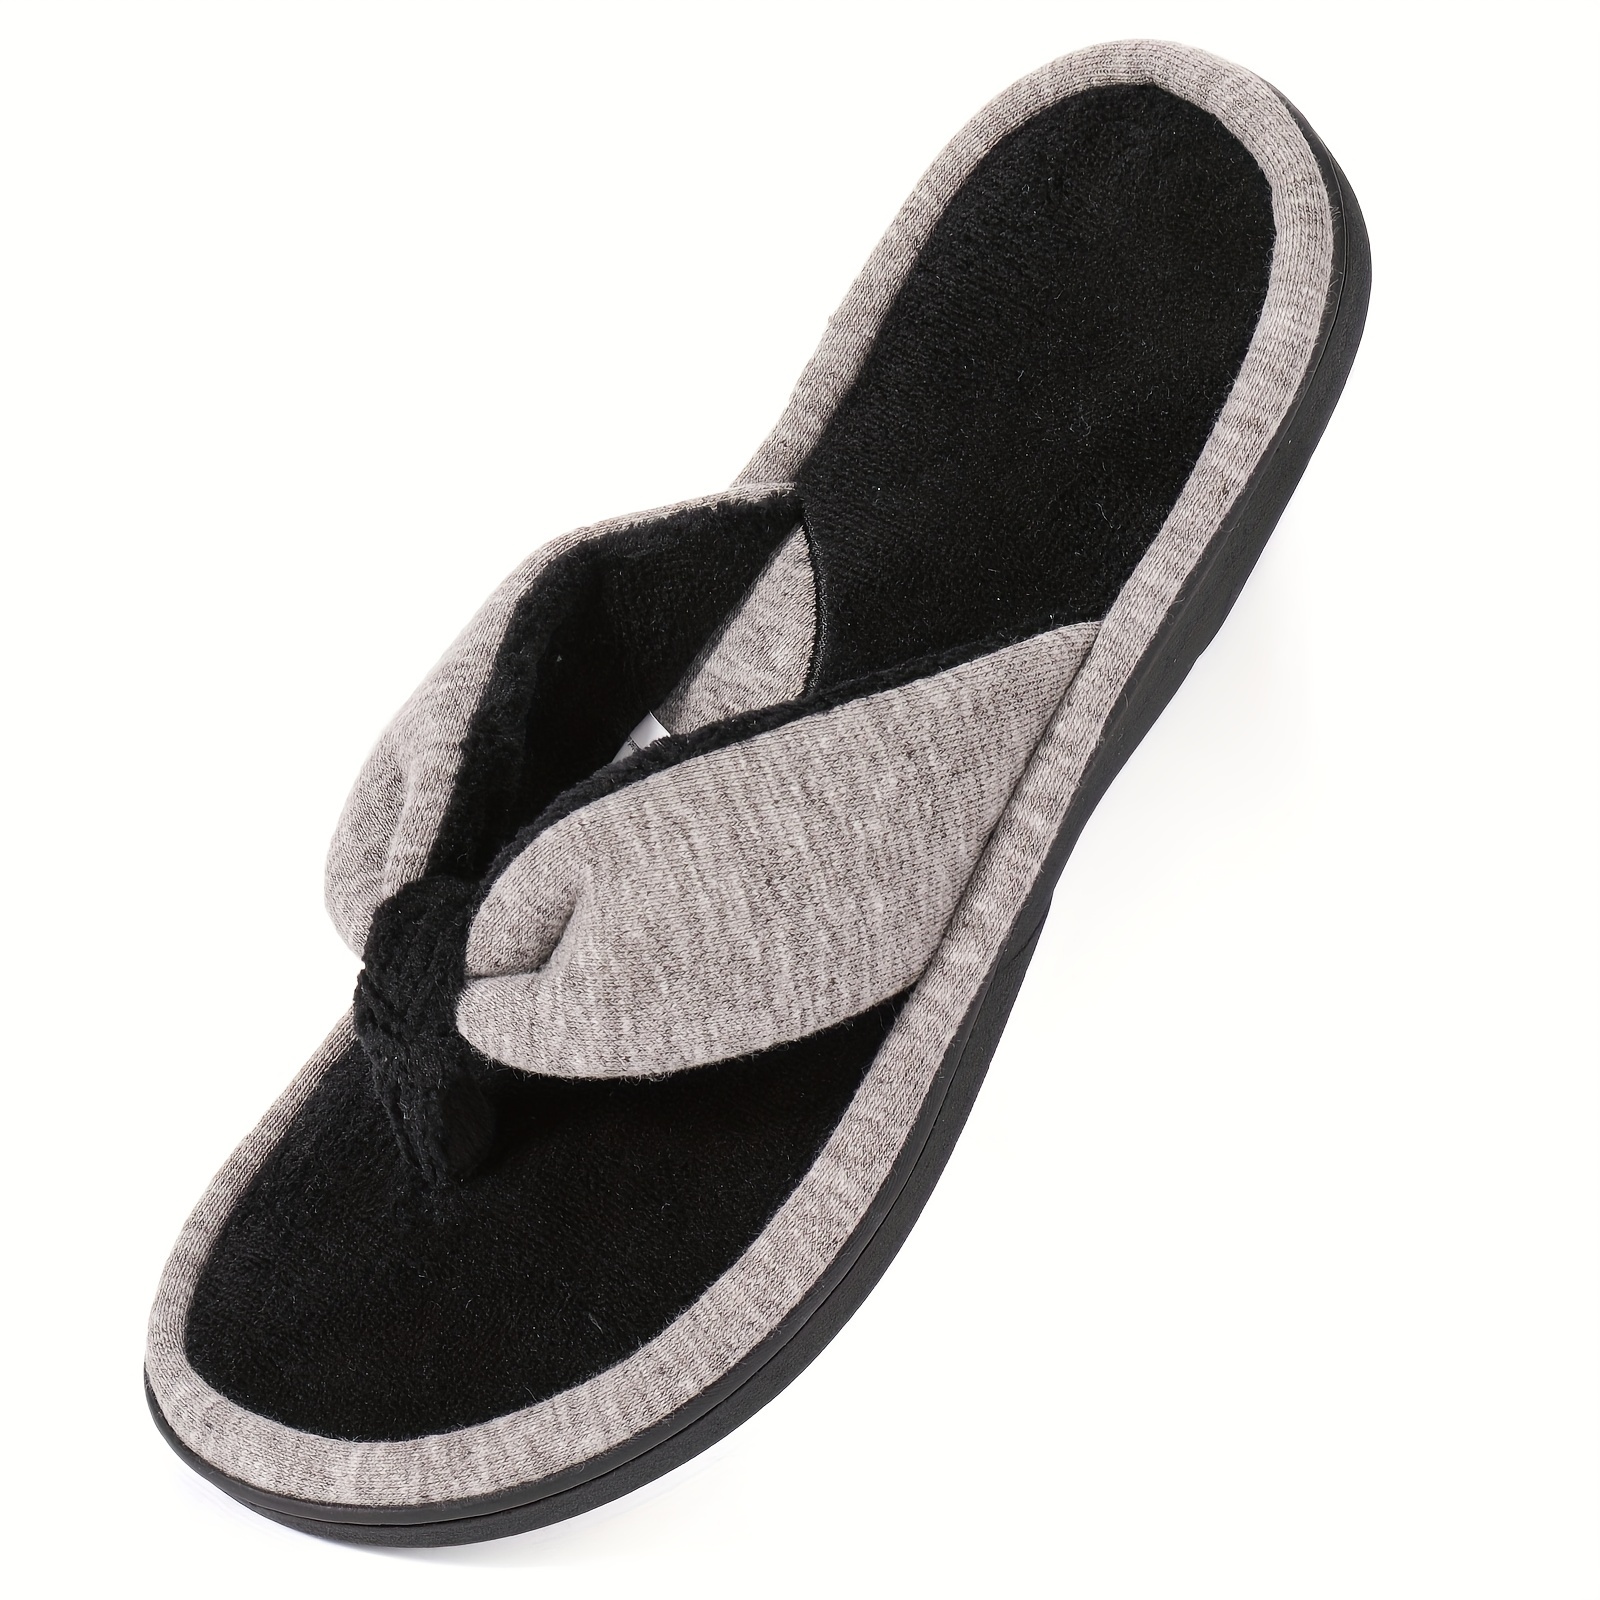 DODOING Women's Memory Foam Flip Flop House Indoor Slippers with Cozy Short  Plush Lining, Spa Thong Sandals Slippersm, Black/ Grey/ Pink